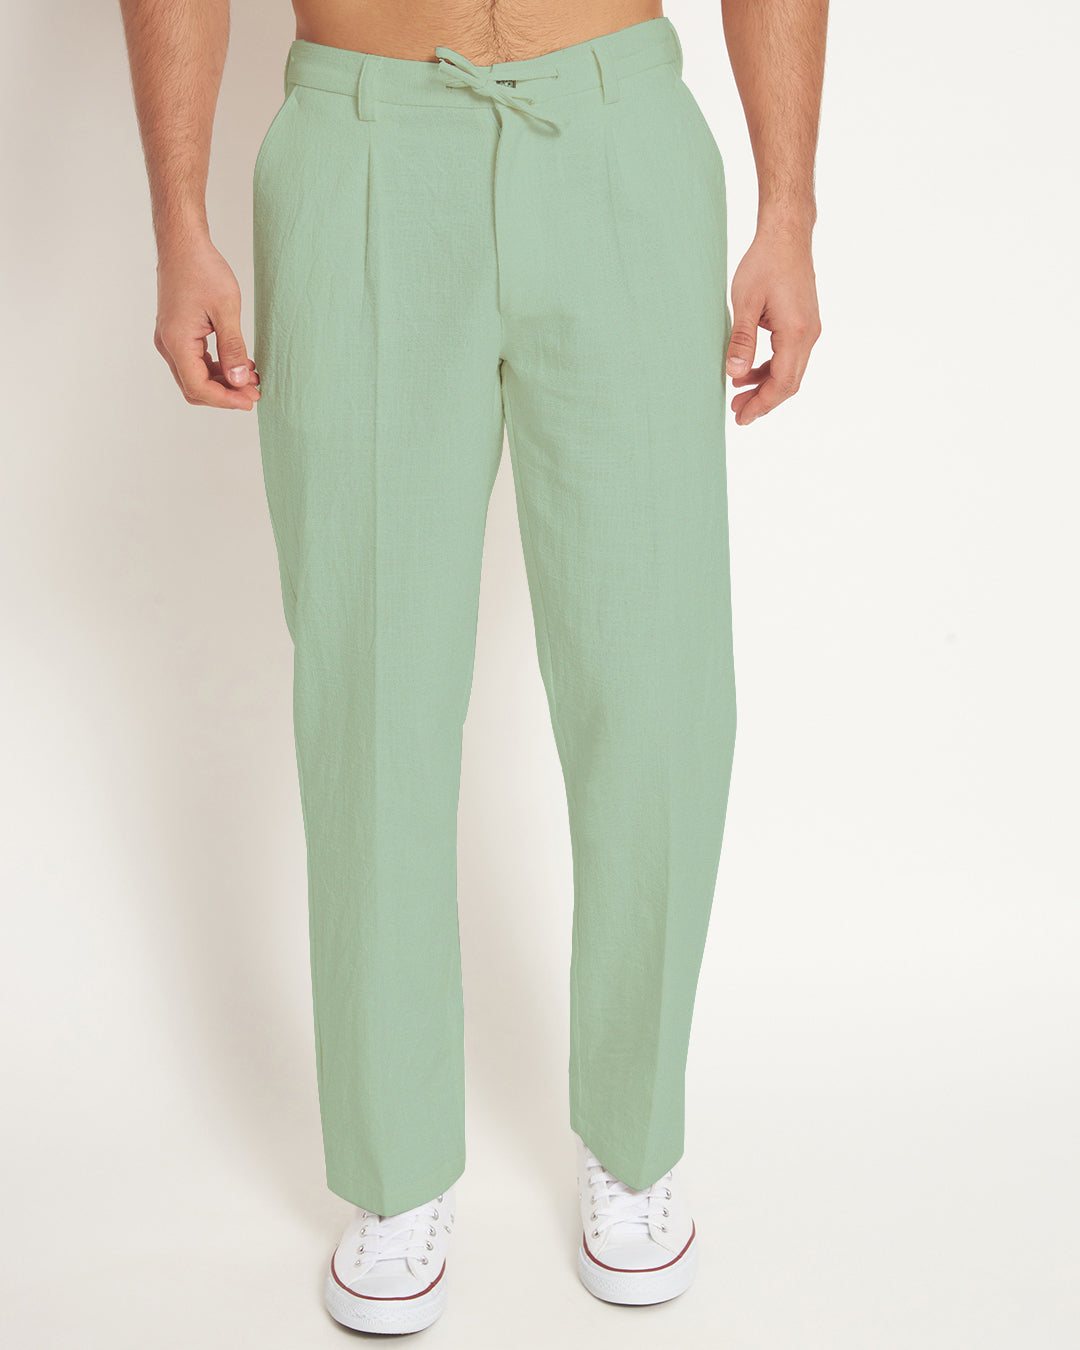 Combo: Casual Ease White & Spring Green Men's Pants - Set of 2